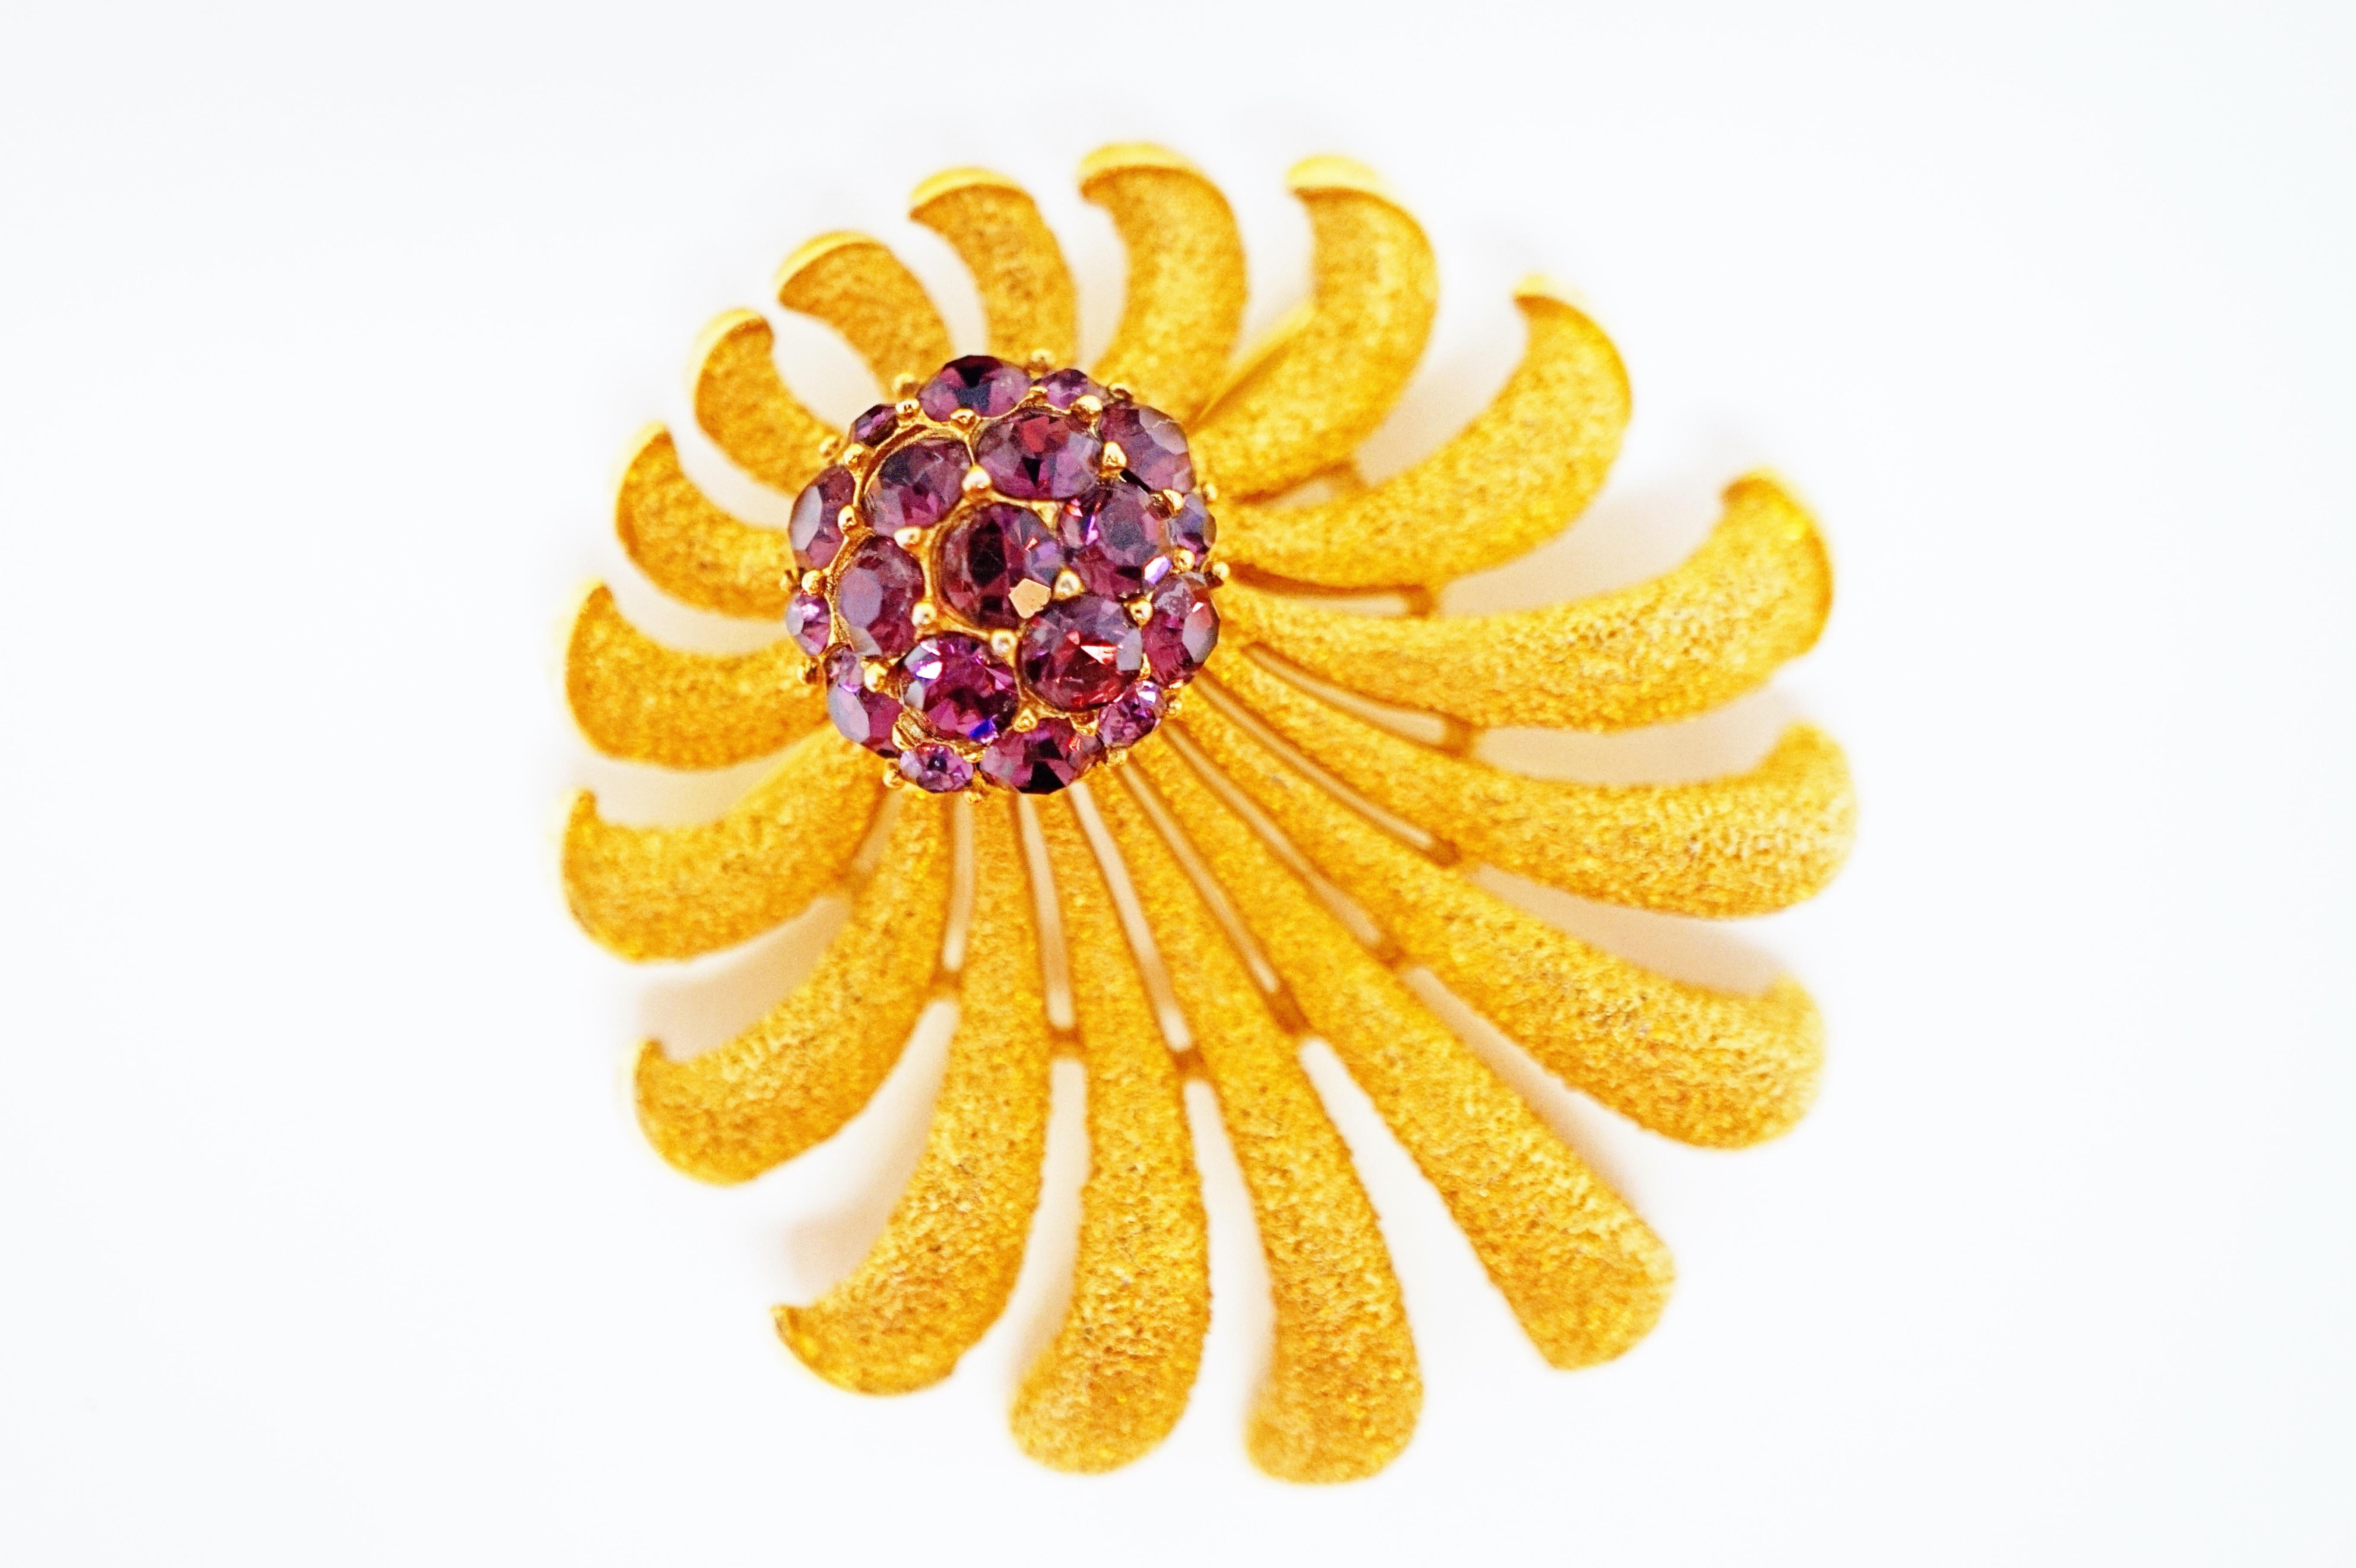 This beautiful gilded brooch by Trifari (circa 1955) marries two popular mid-century modern aesthetics - a classic sunburst design with a Brutalist-inspired texture and accented with a sparkling Amethyst-colored rhinestone cluster. A wonderful